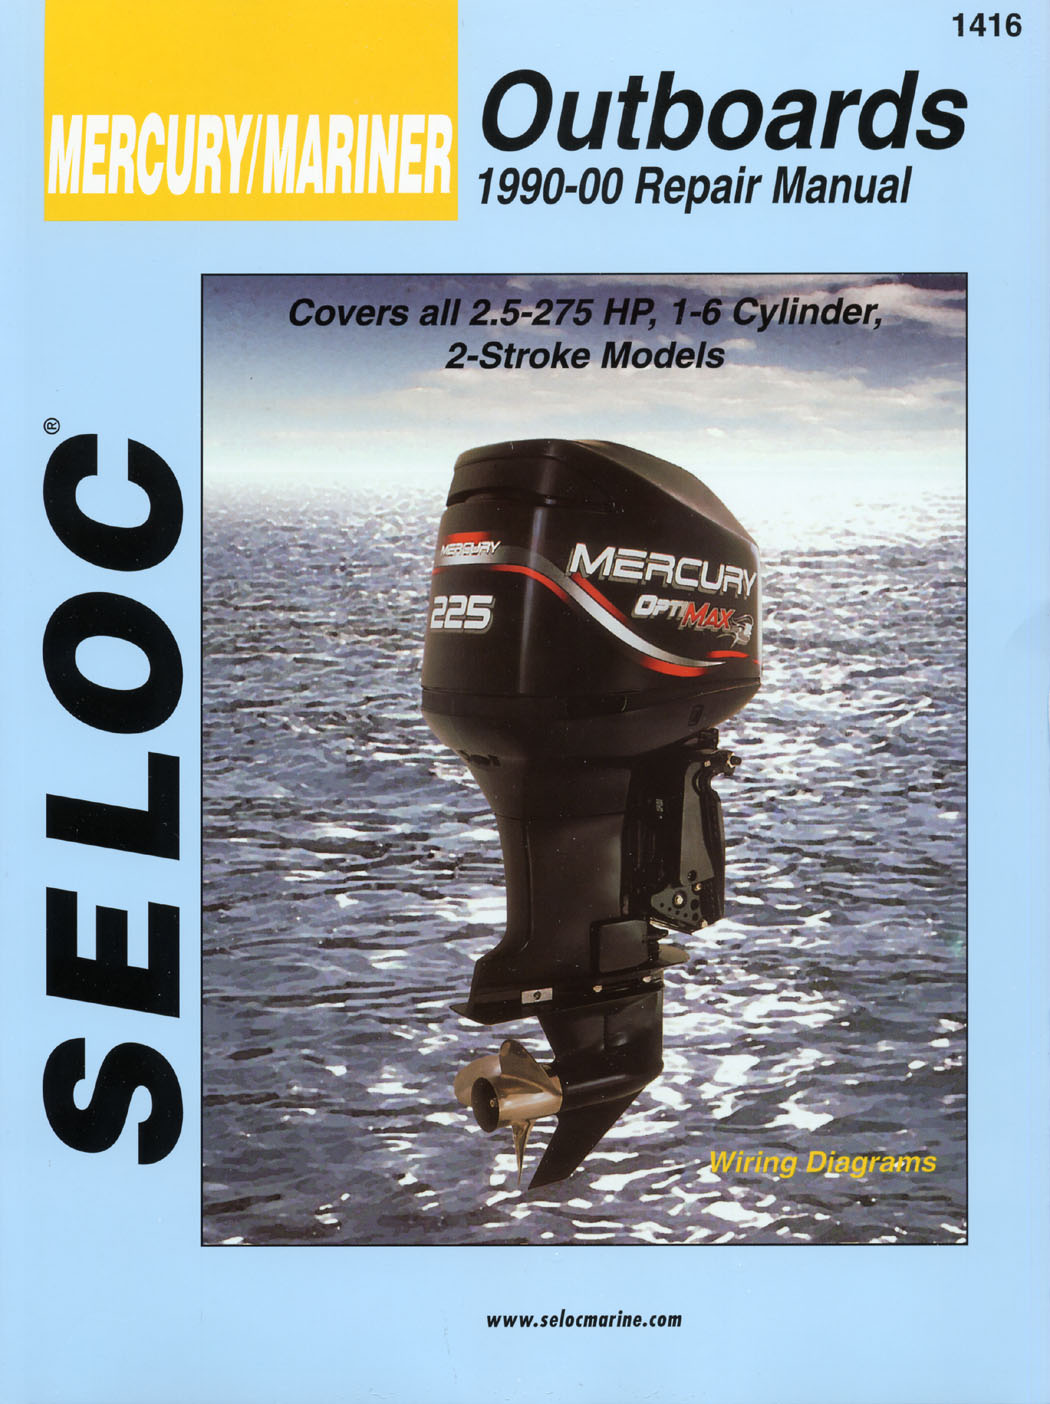 Mercury / Mariner Outboards 2.5-275 HP, 1990-2000